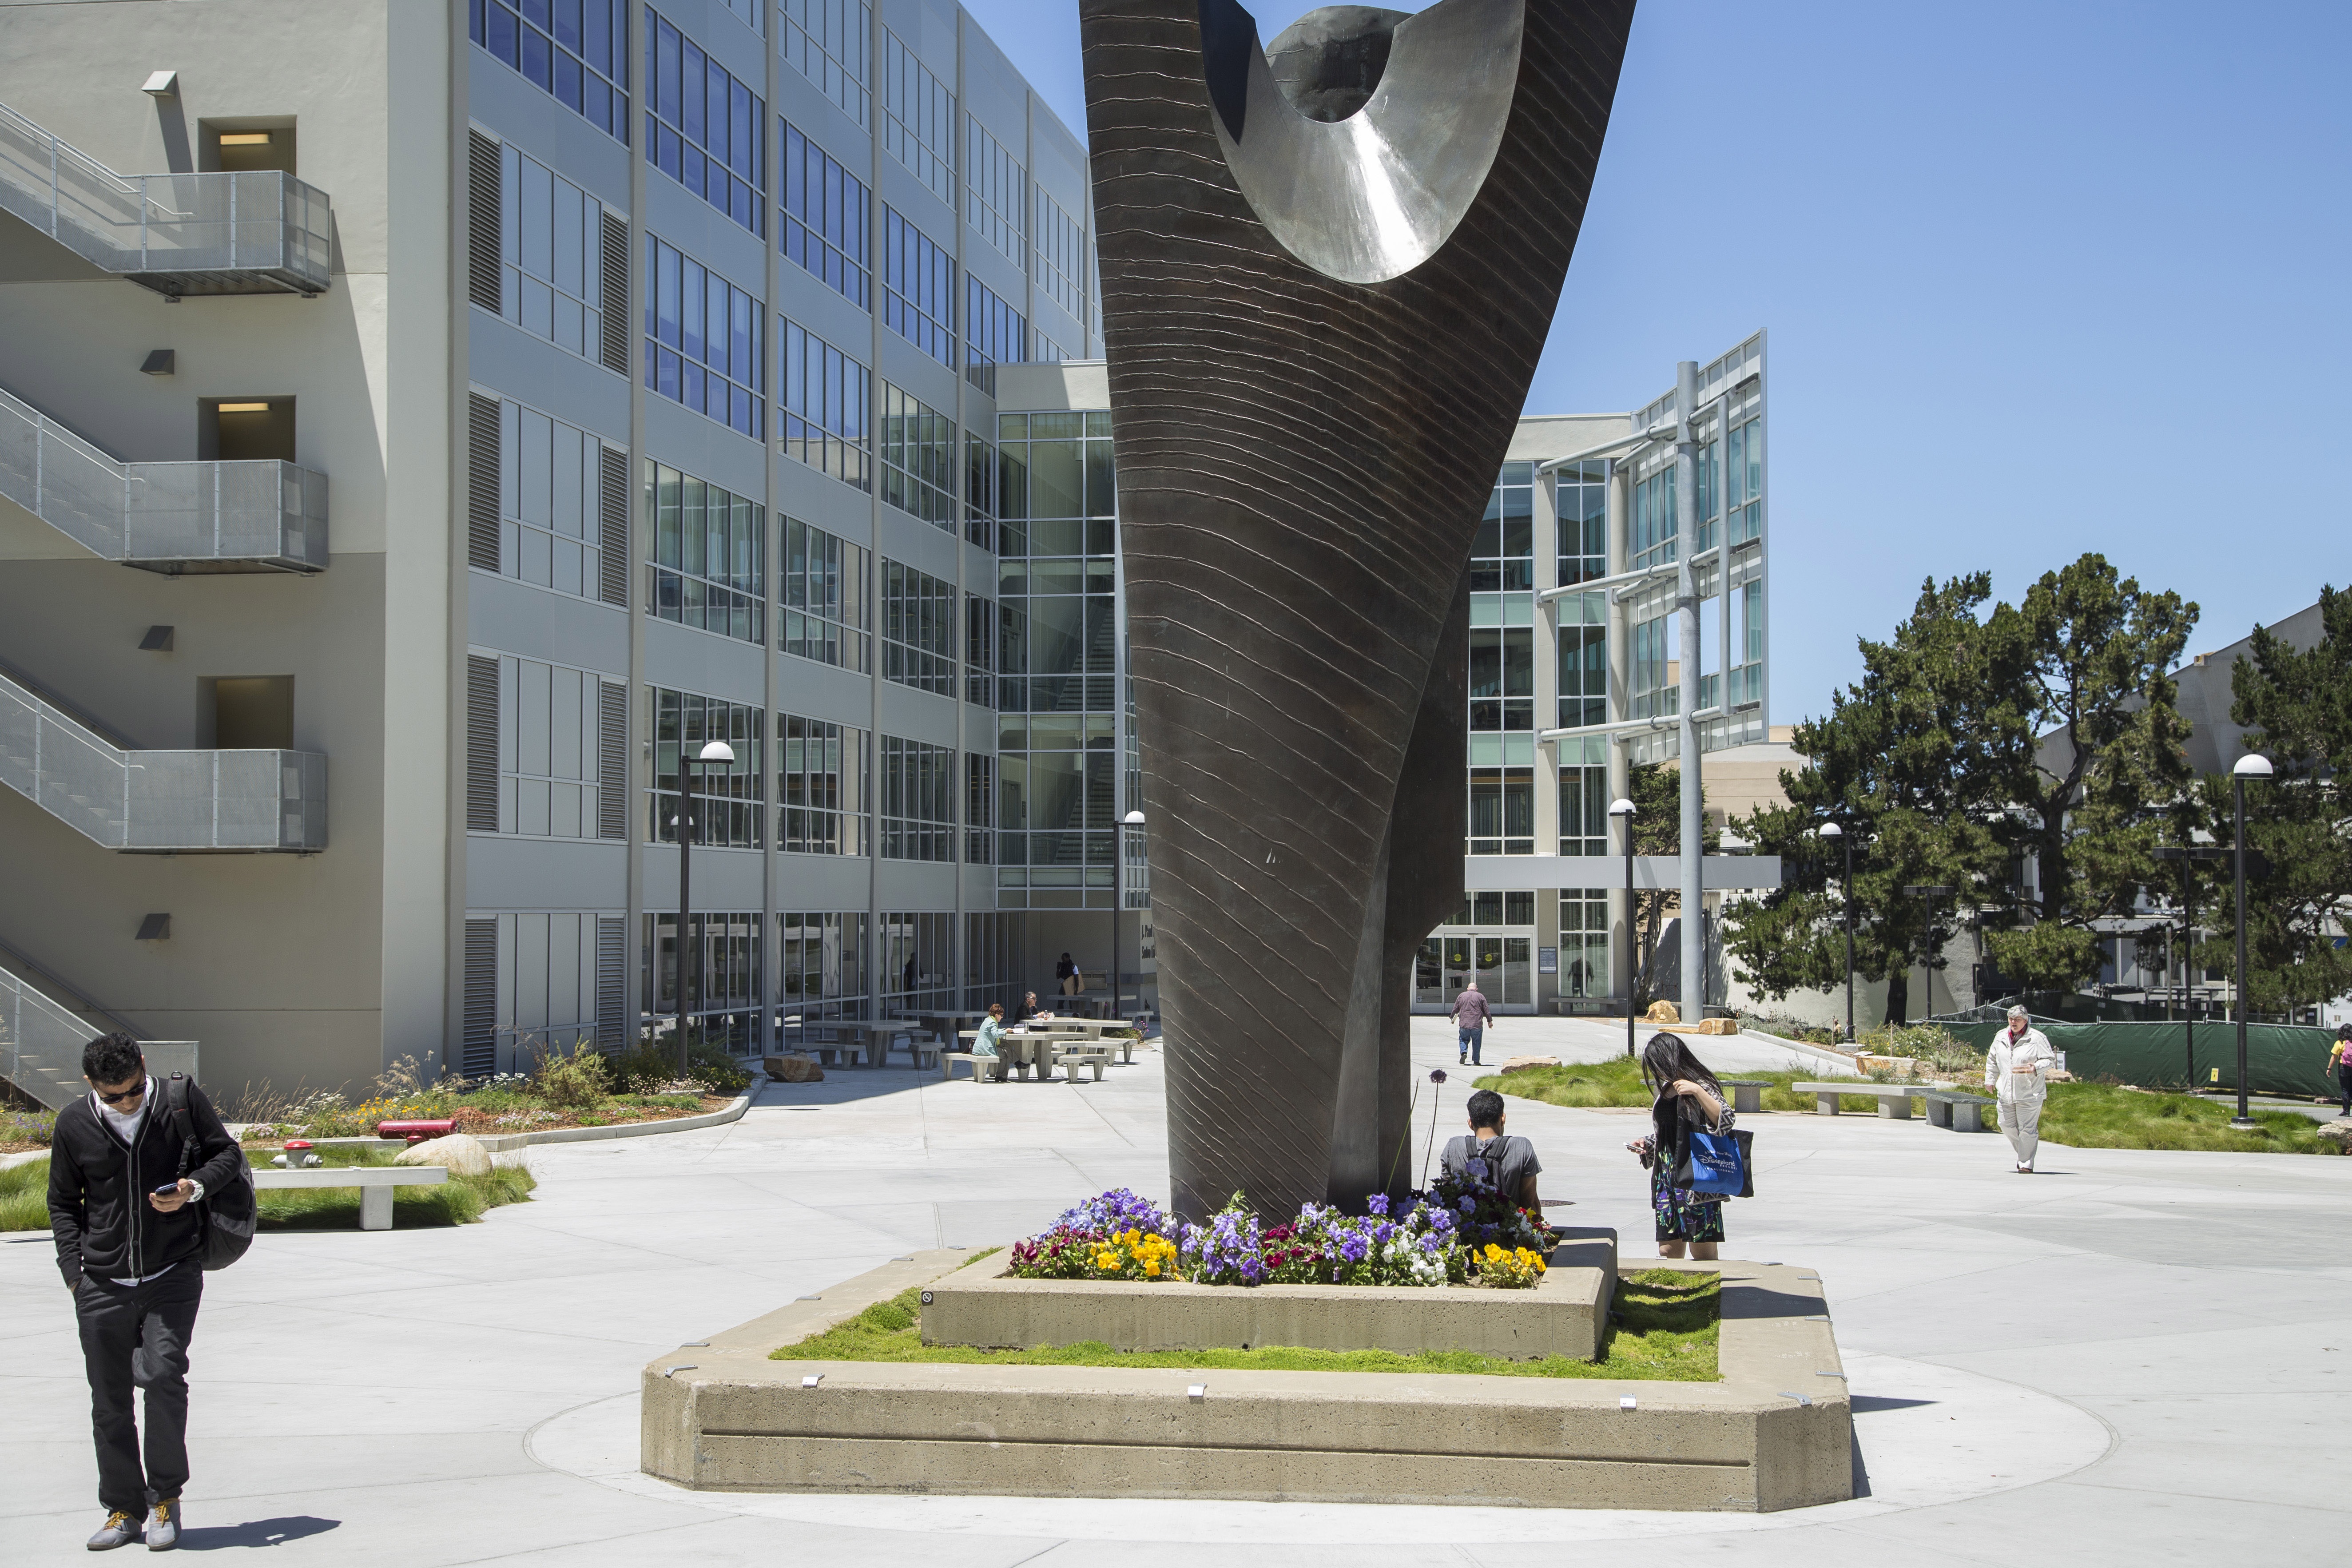 Picture of sculpture located outside of the library